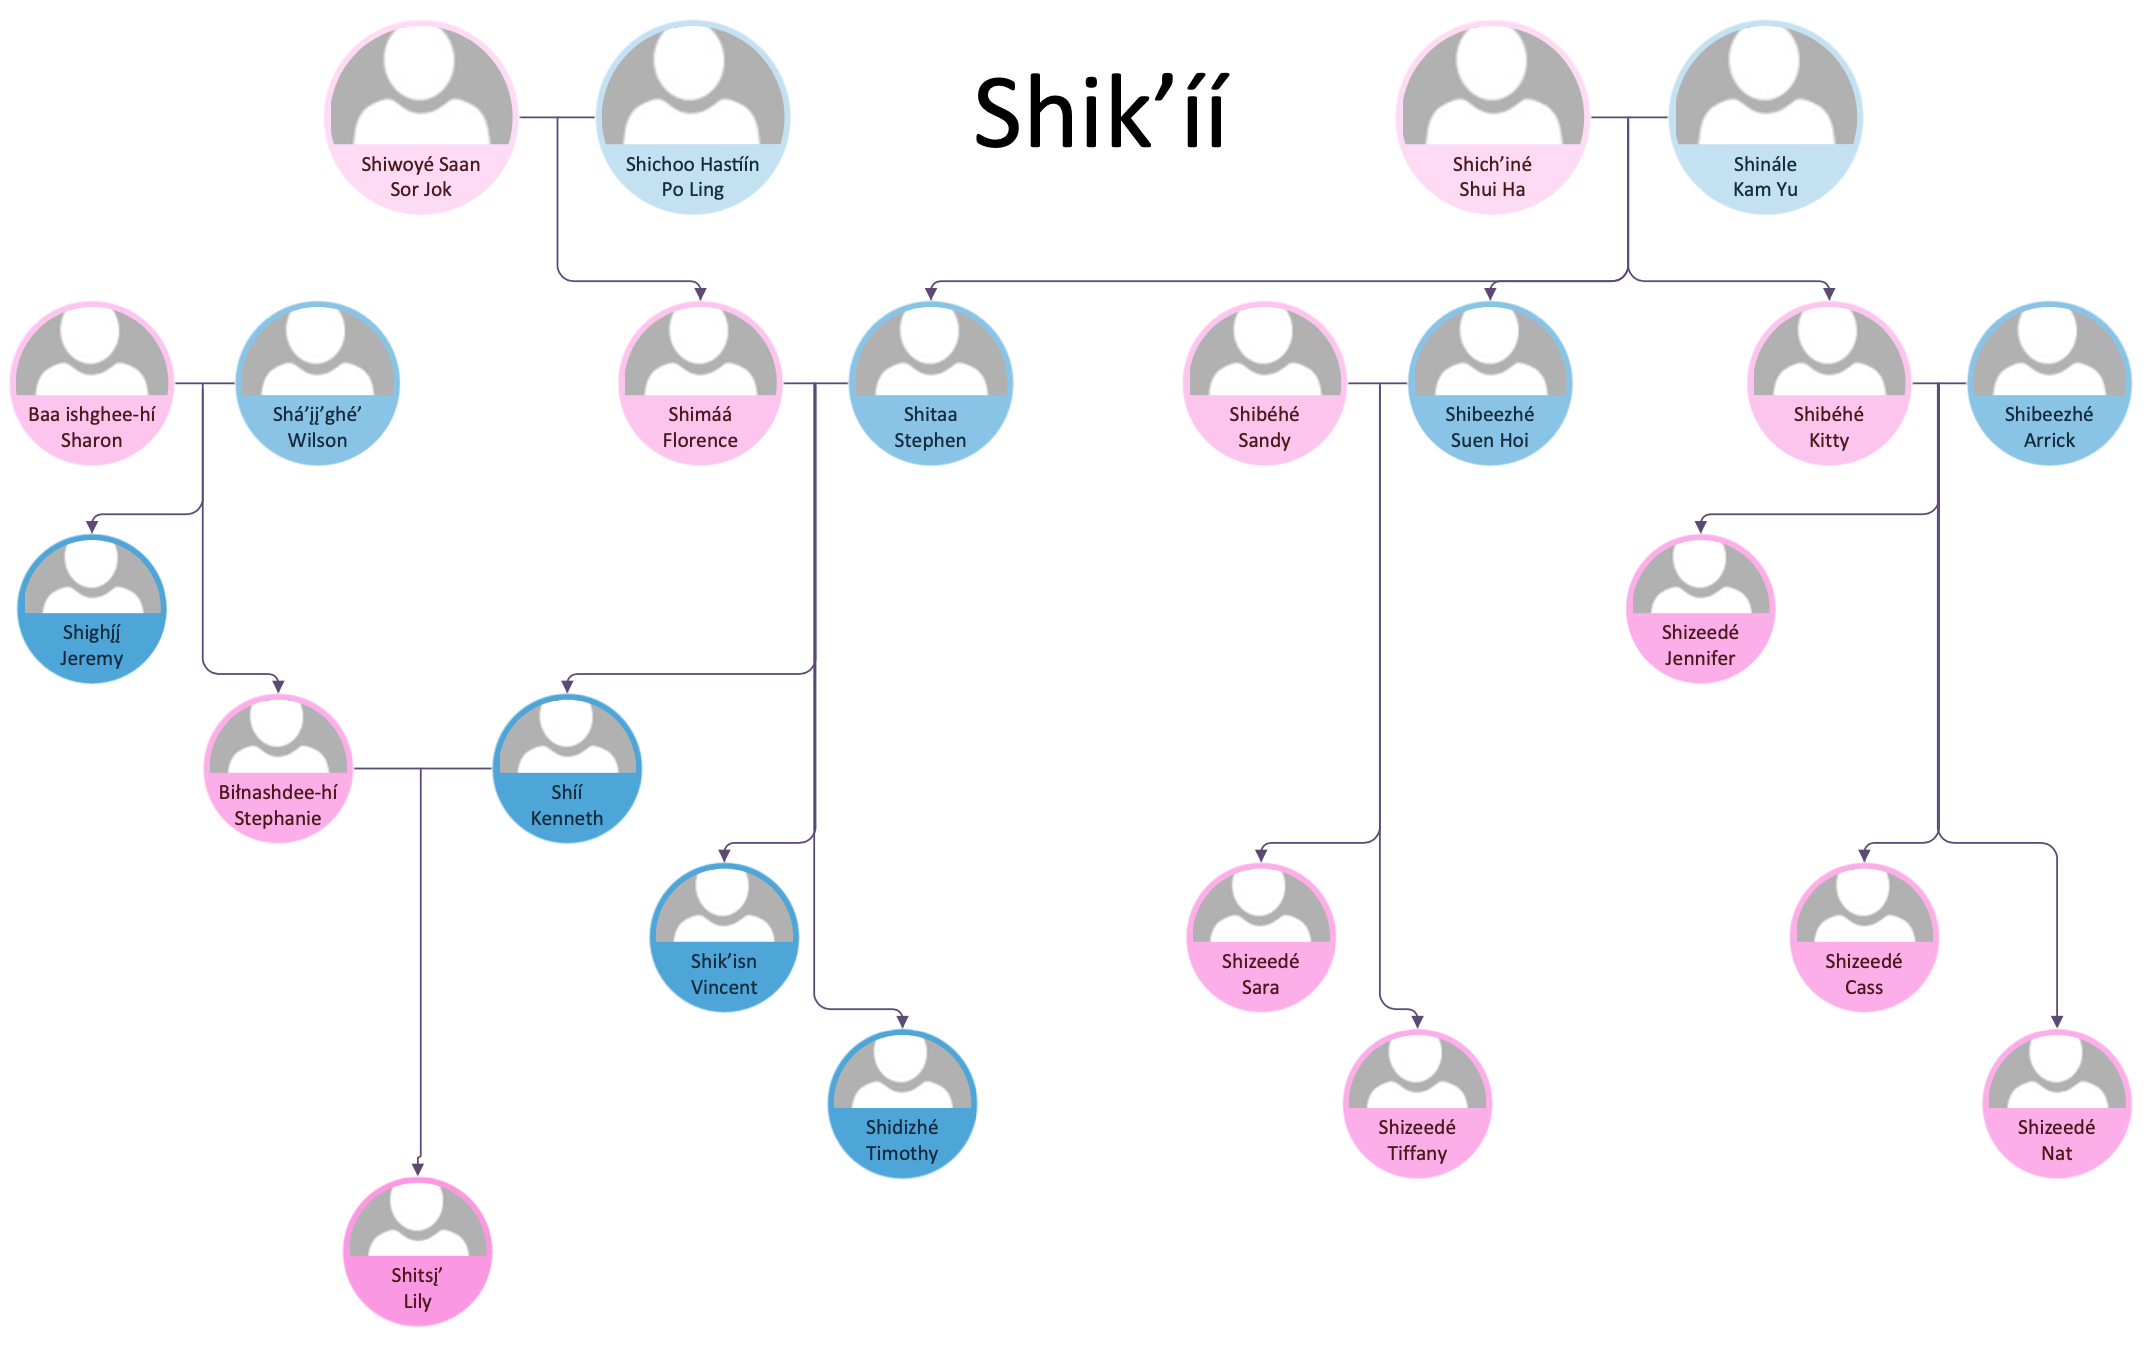 Family tree diagram with Apache kinship terms.